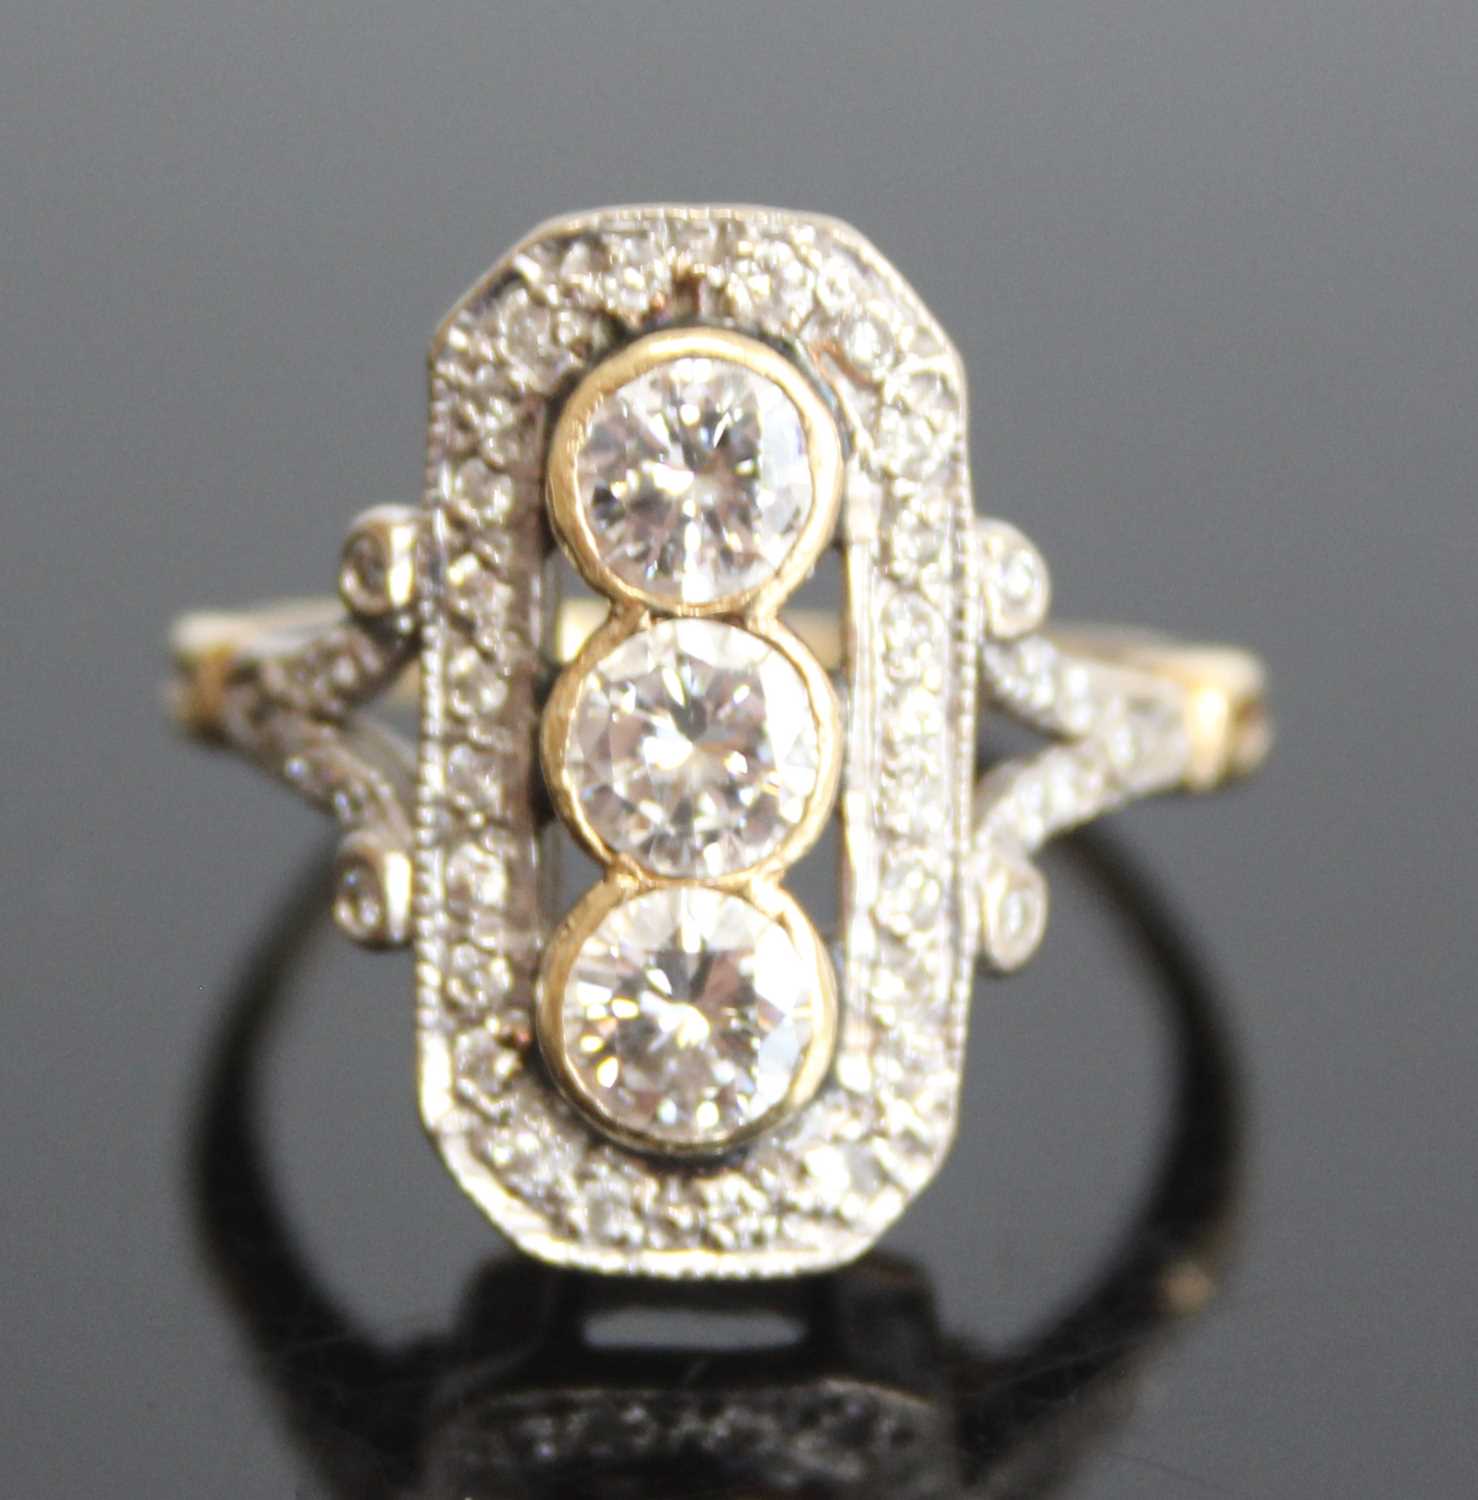 An 18ct yellow and white gold Art Deco style panel ring comprising 3 round brilliant cut diamonds in